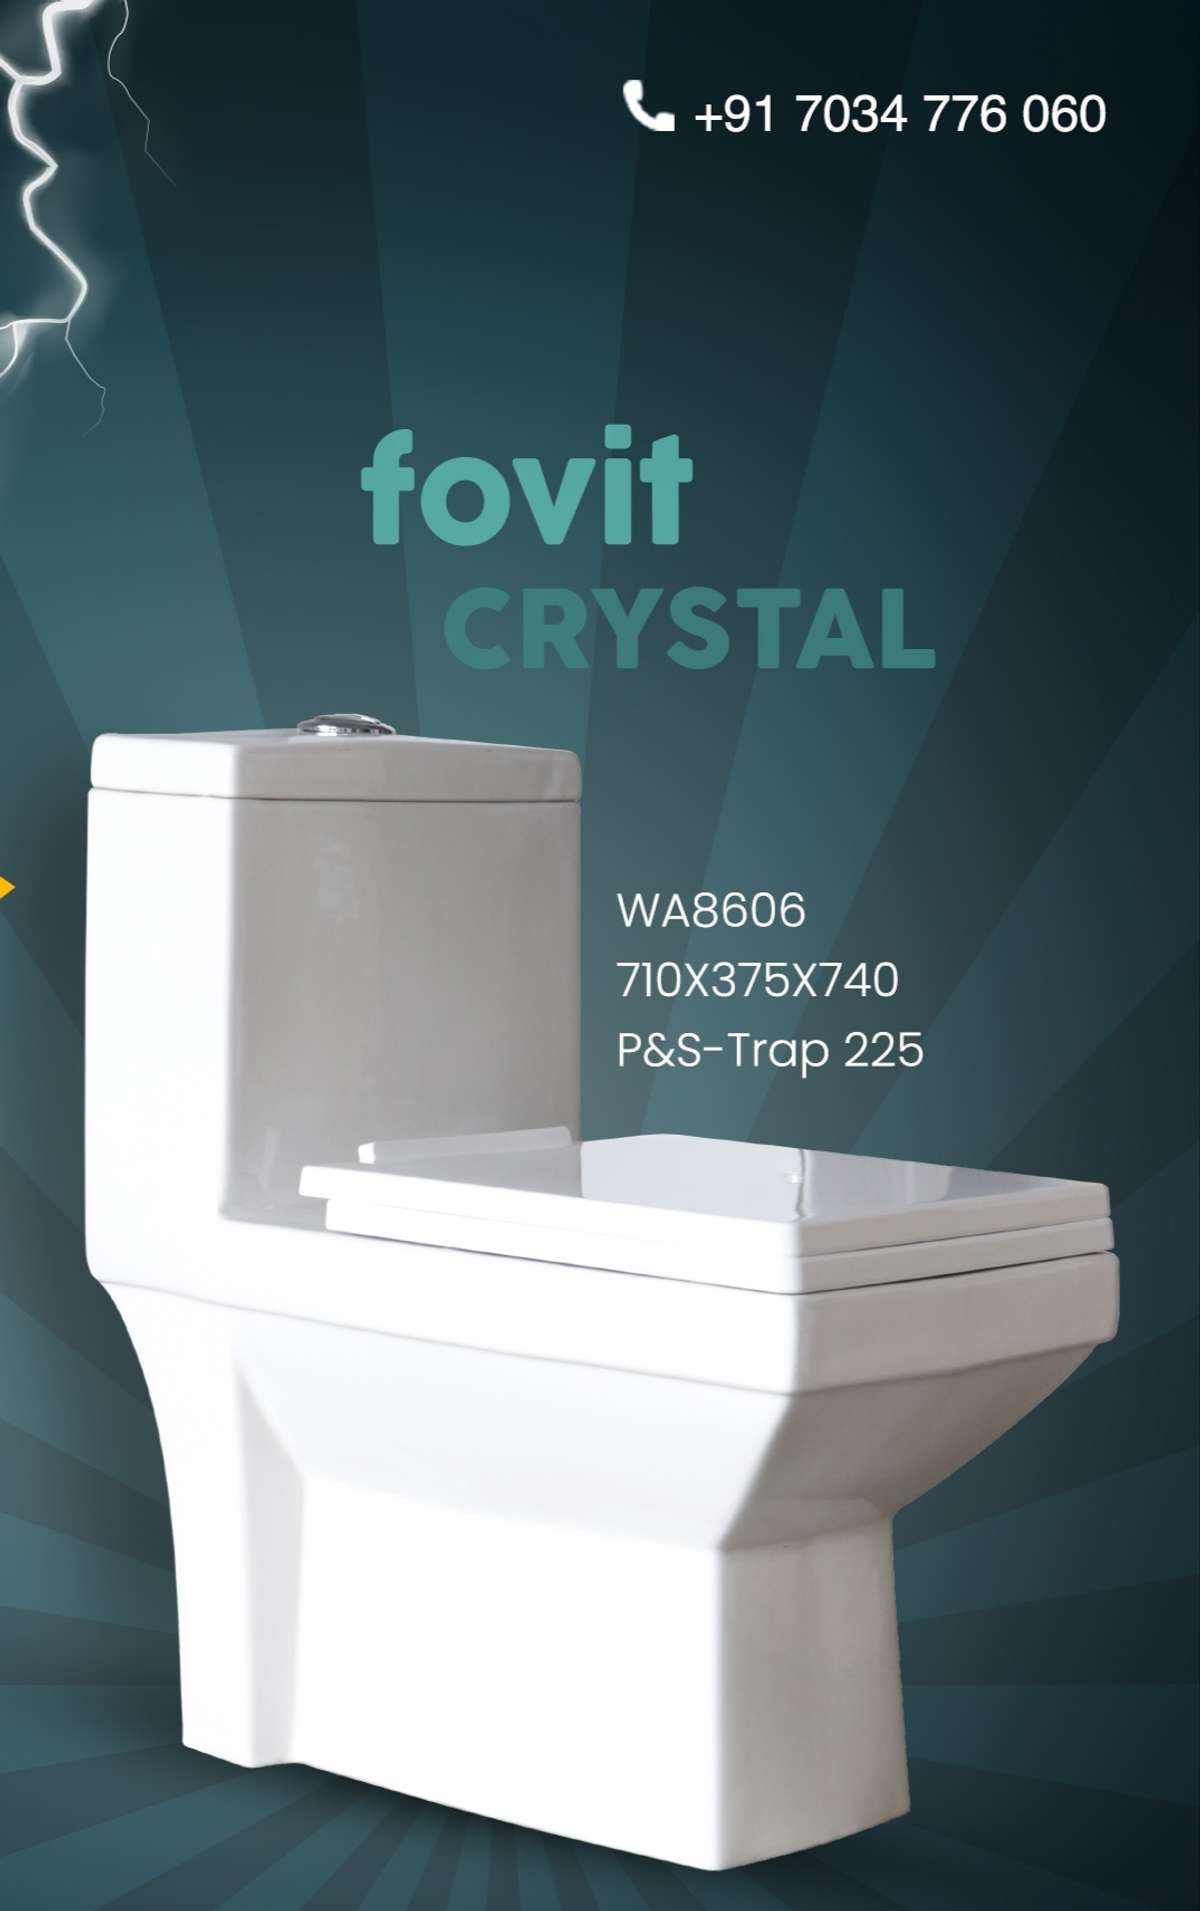 Best Offers for Single piece toilet. 
Free delivery all over Kerala. #BathroomDesigns  #BathroomRenovation  #bathroom  #SmallHouse  #HouseConstruction  #home